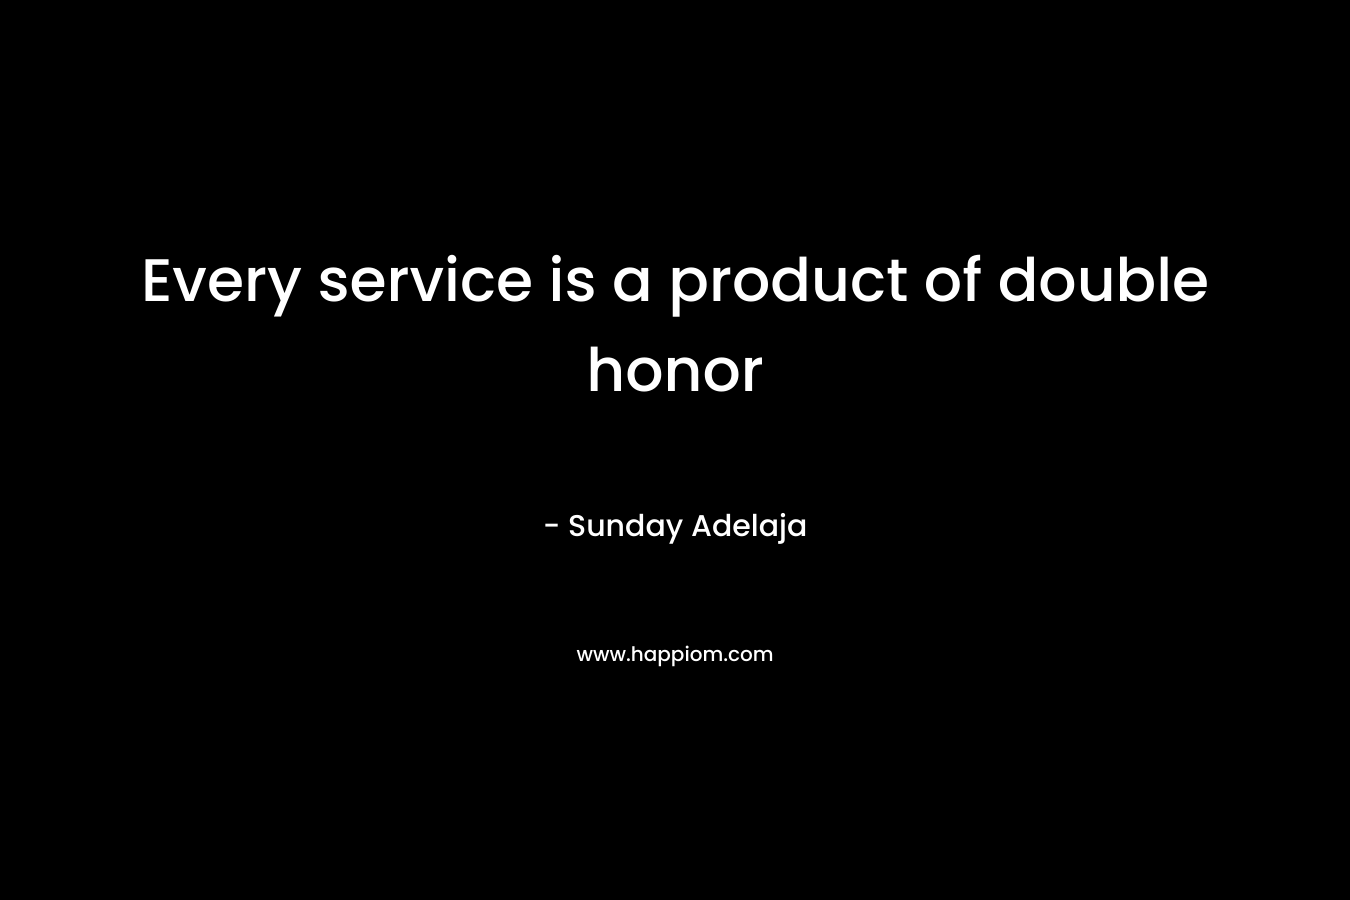 Every service is a product of double honor